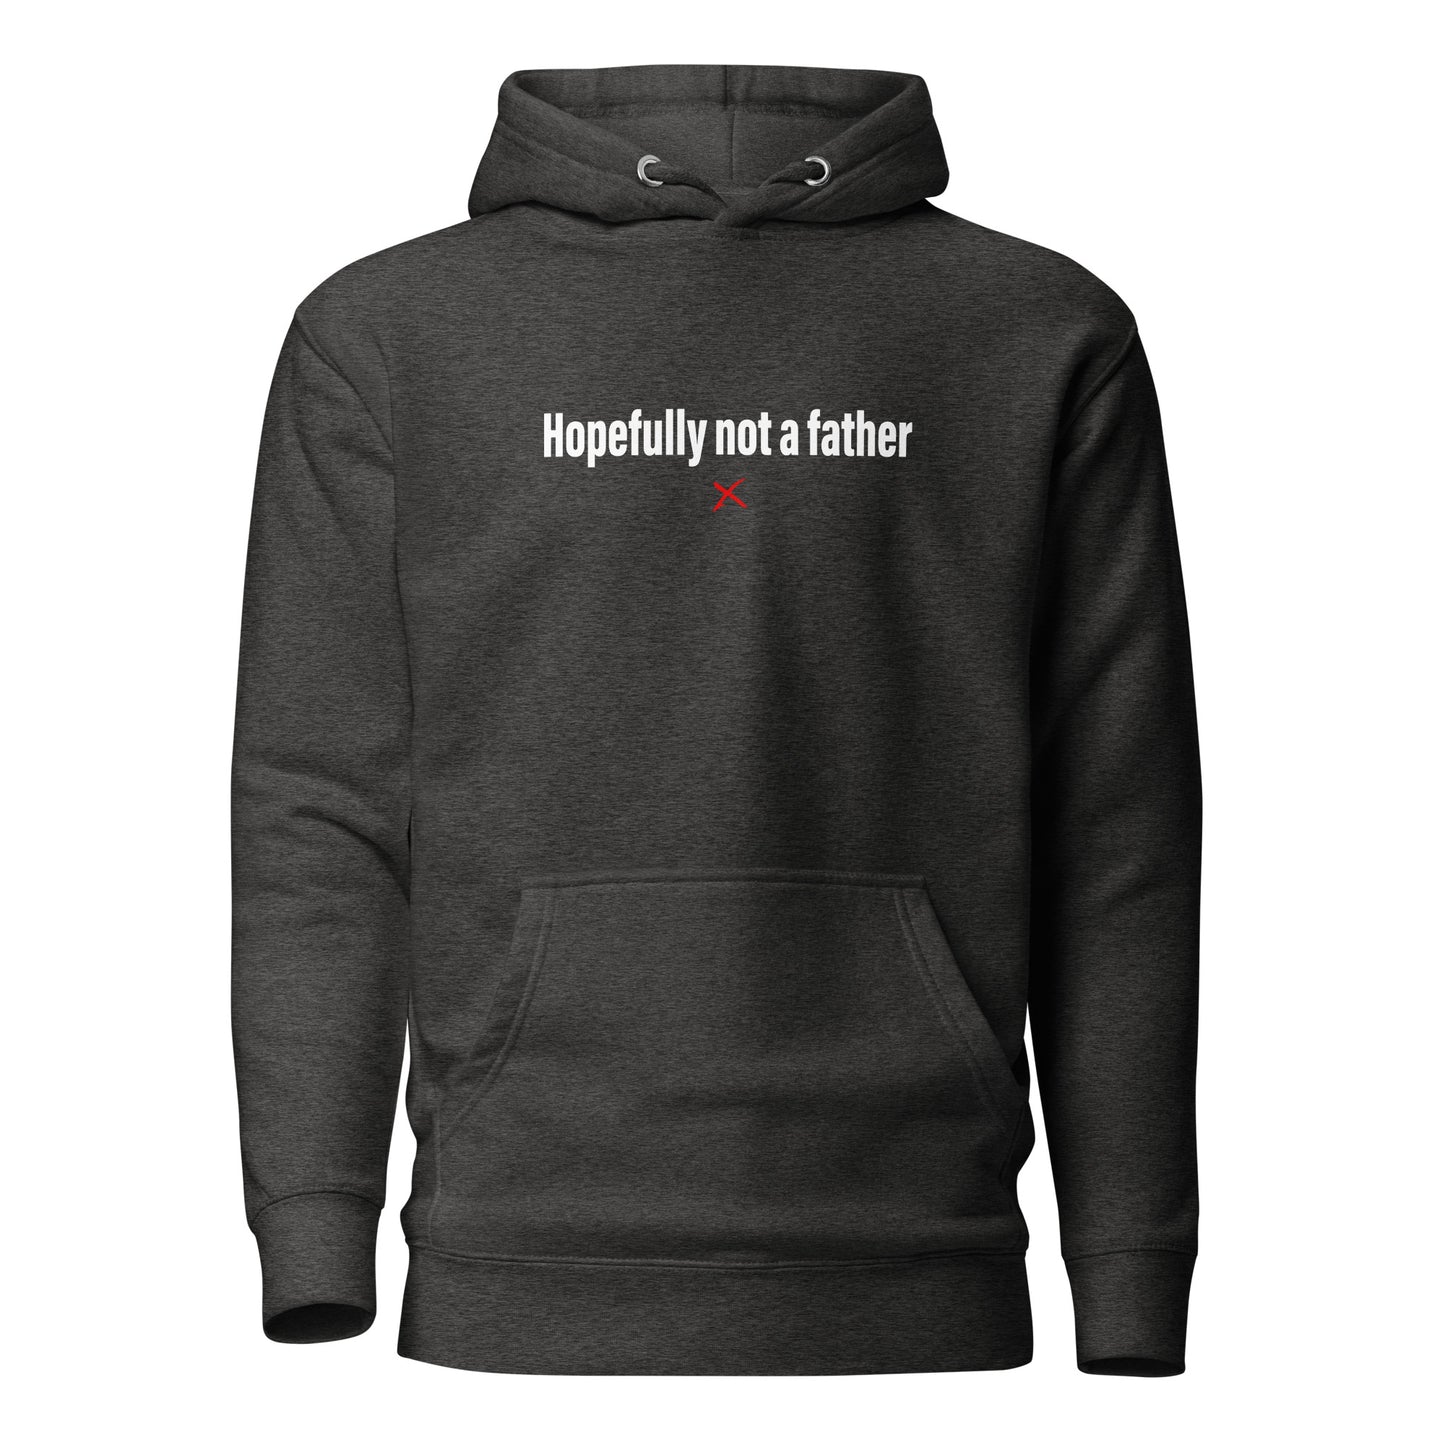 Hopefully not a father - Hoodie